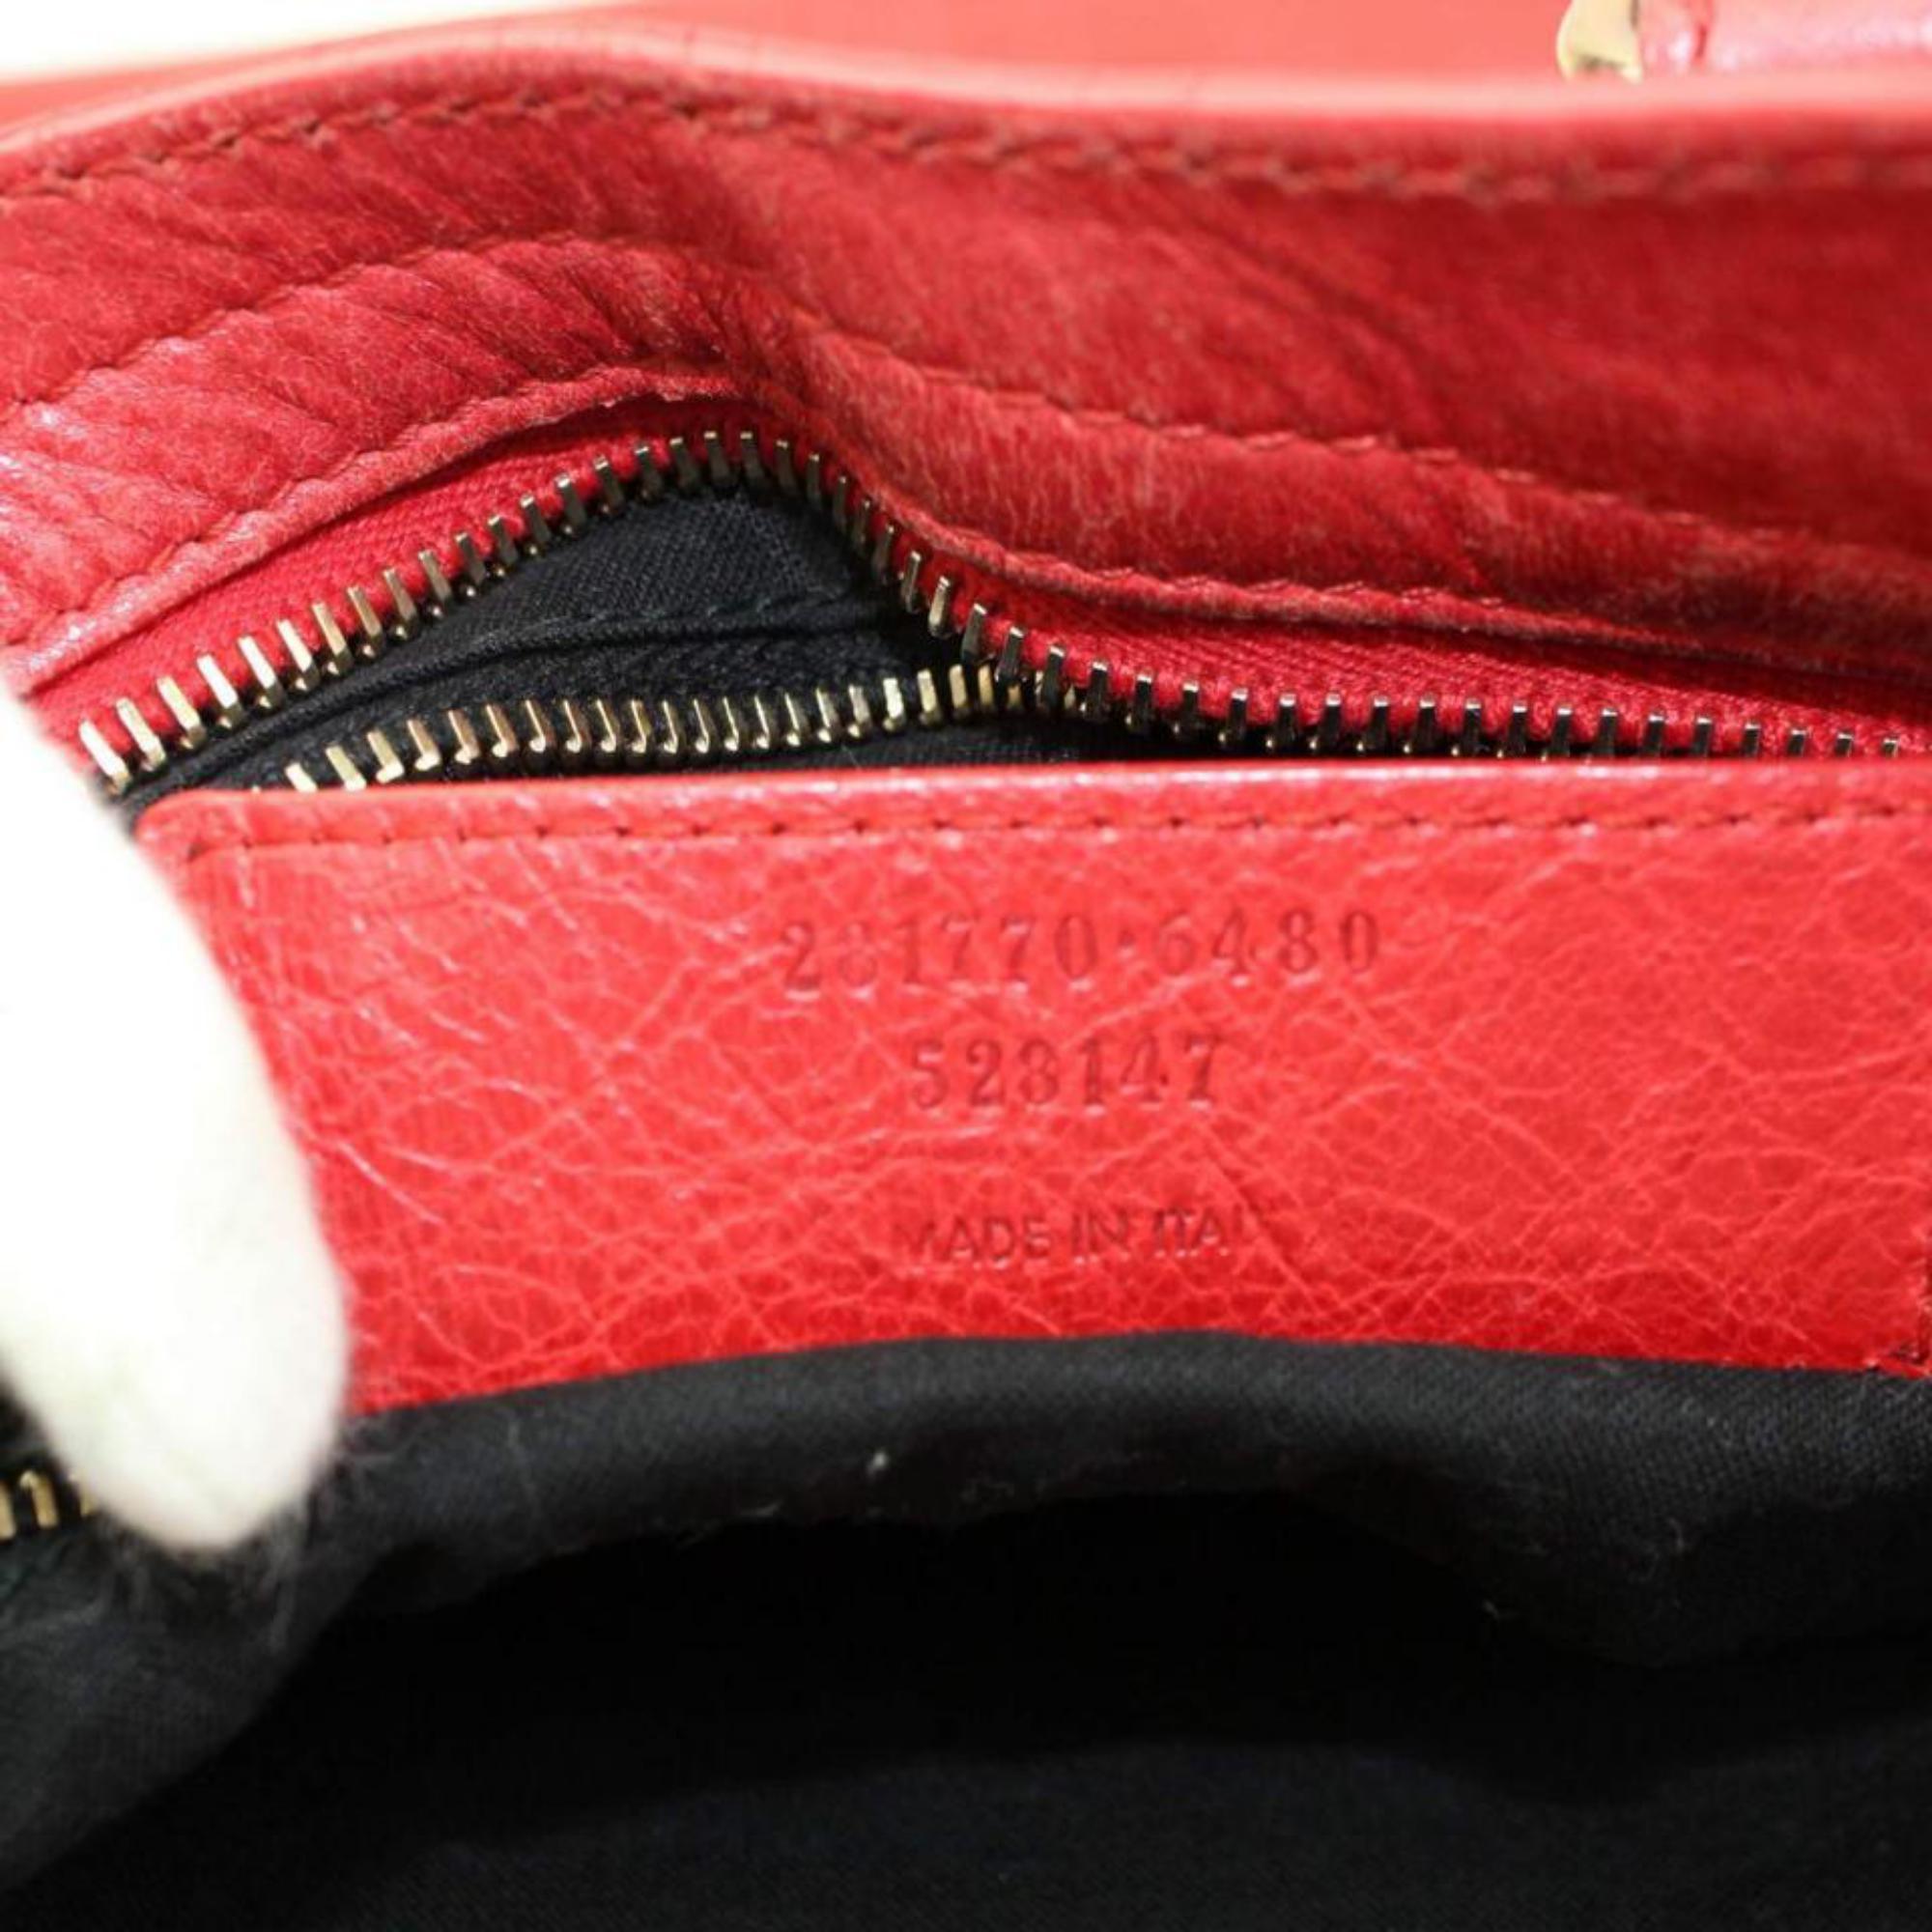 Balenciaga The City 2way 866491 Red Leather Shoulder Bag In Good Condition For Sale In Forest Hills, NY